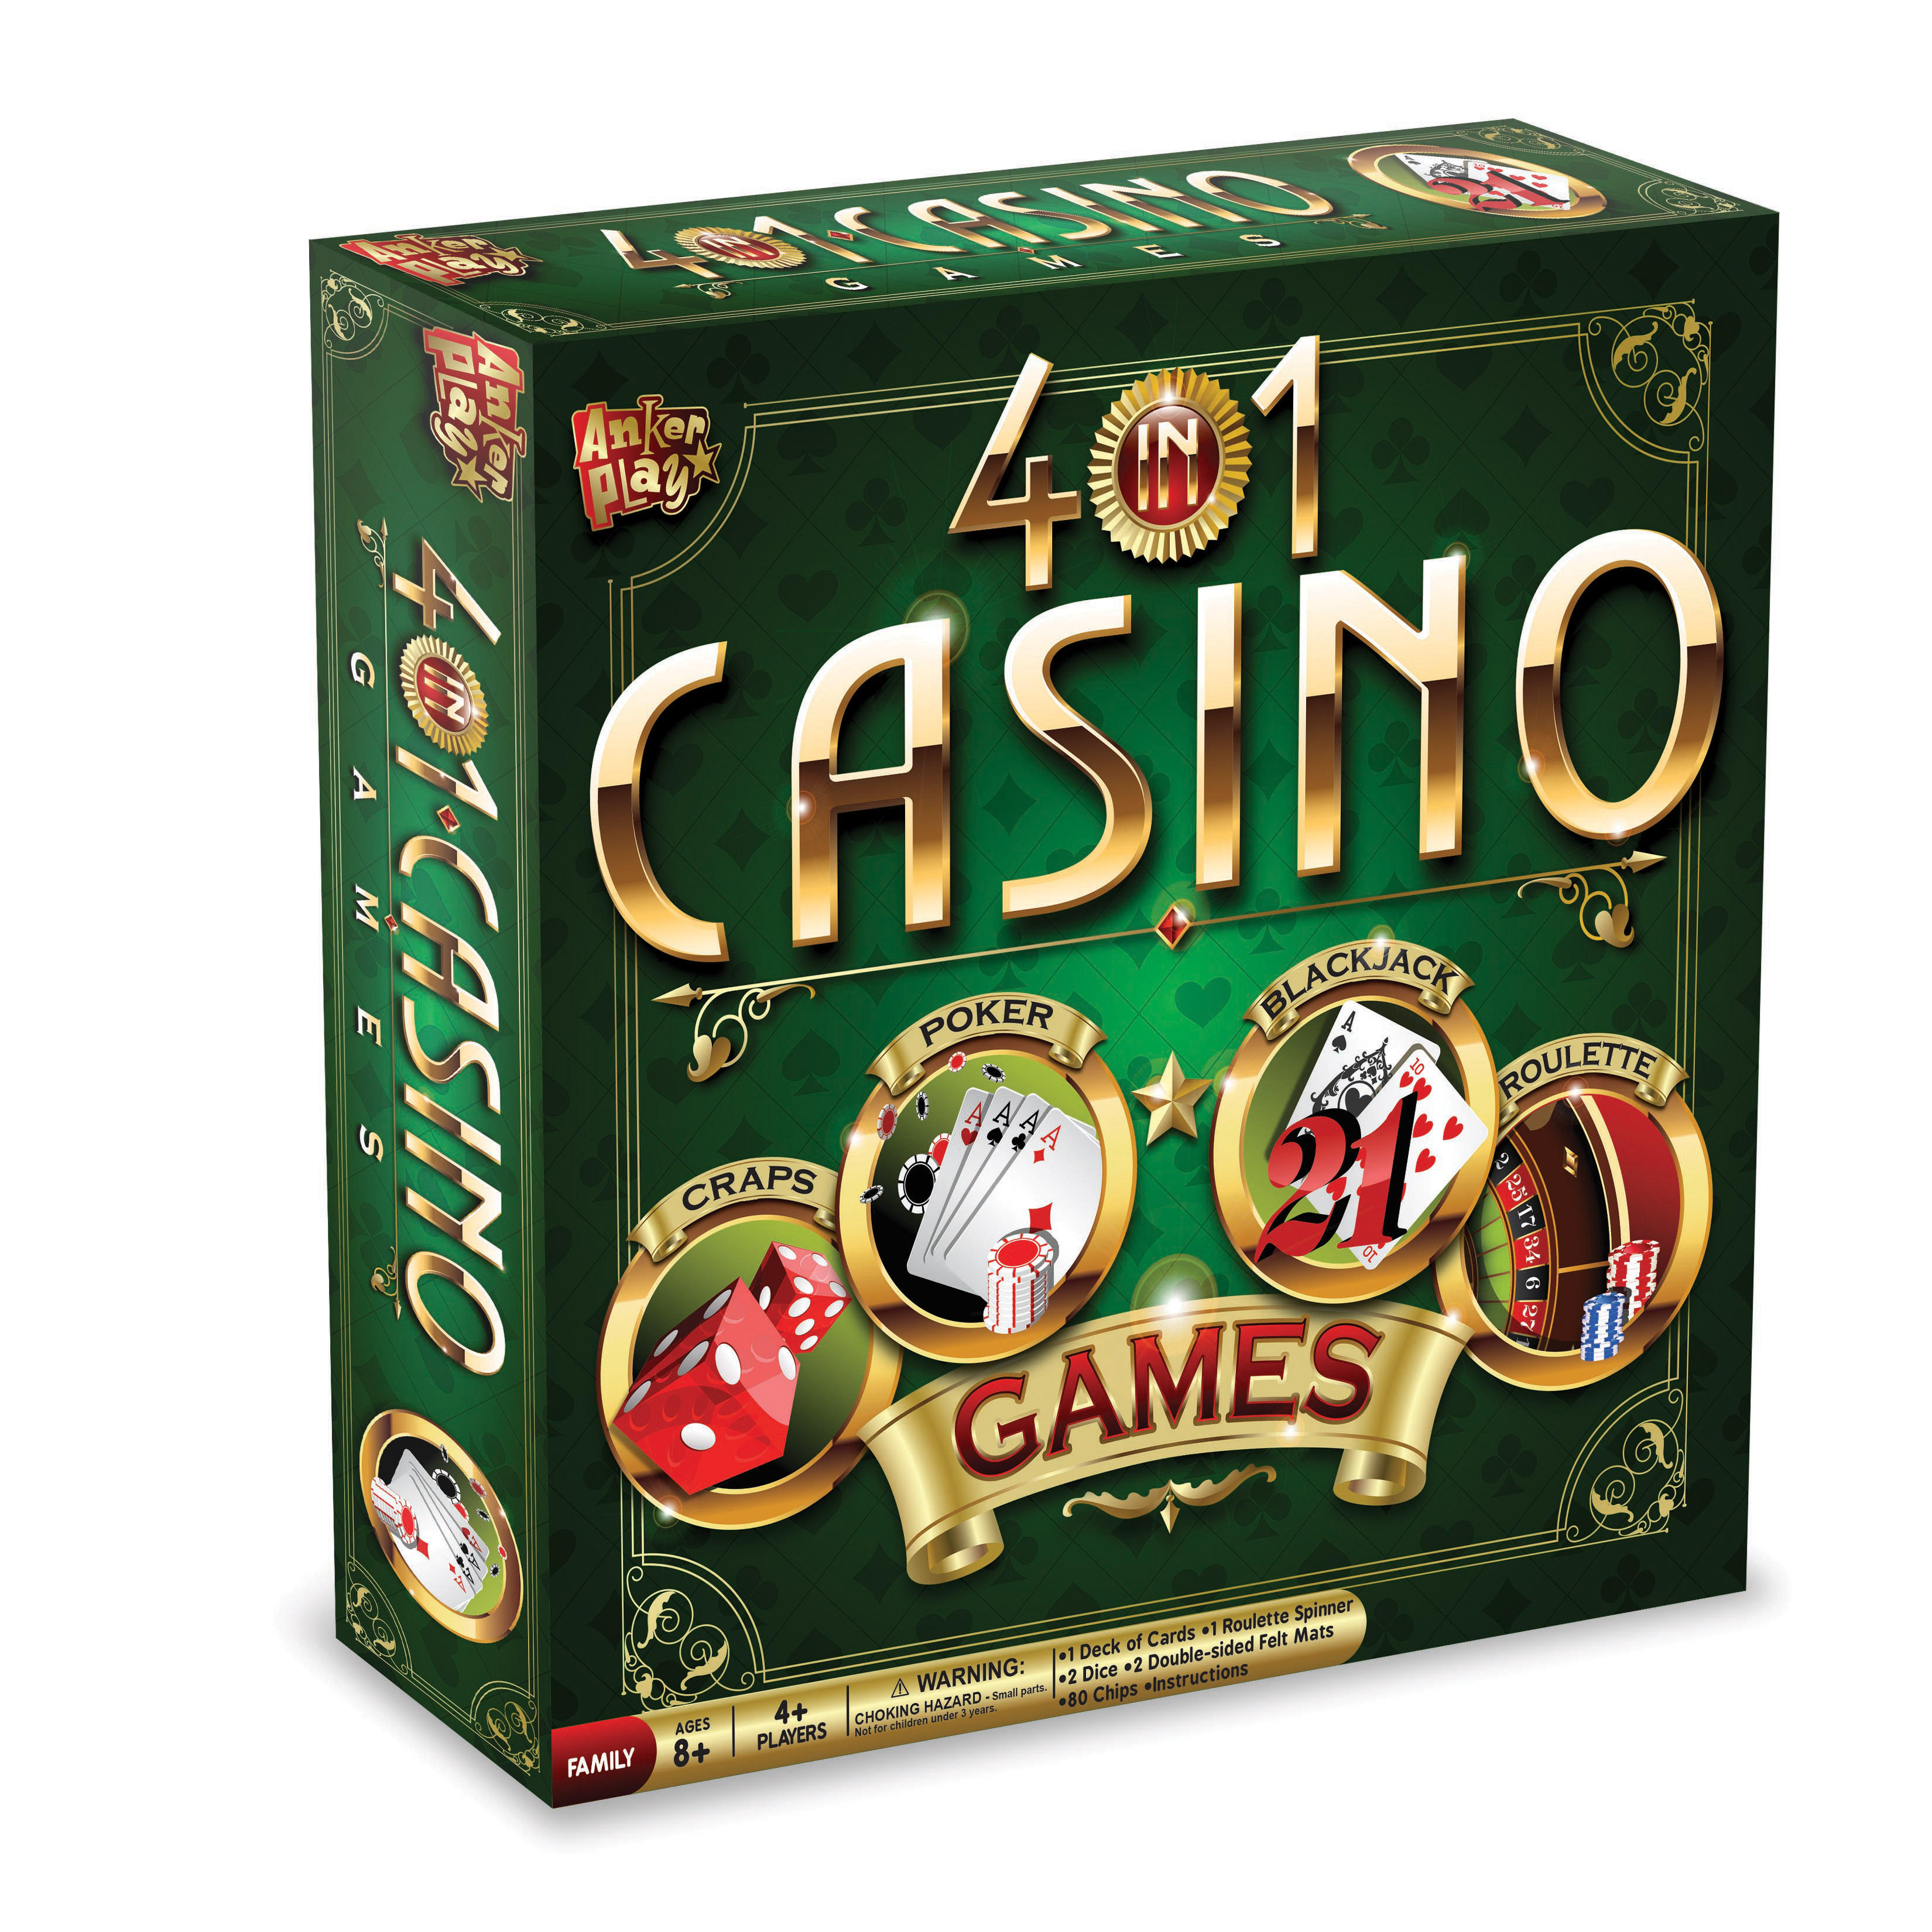 Free Online Games: Play board games, card games, casino games